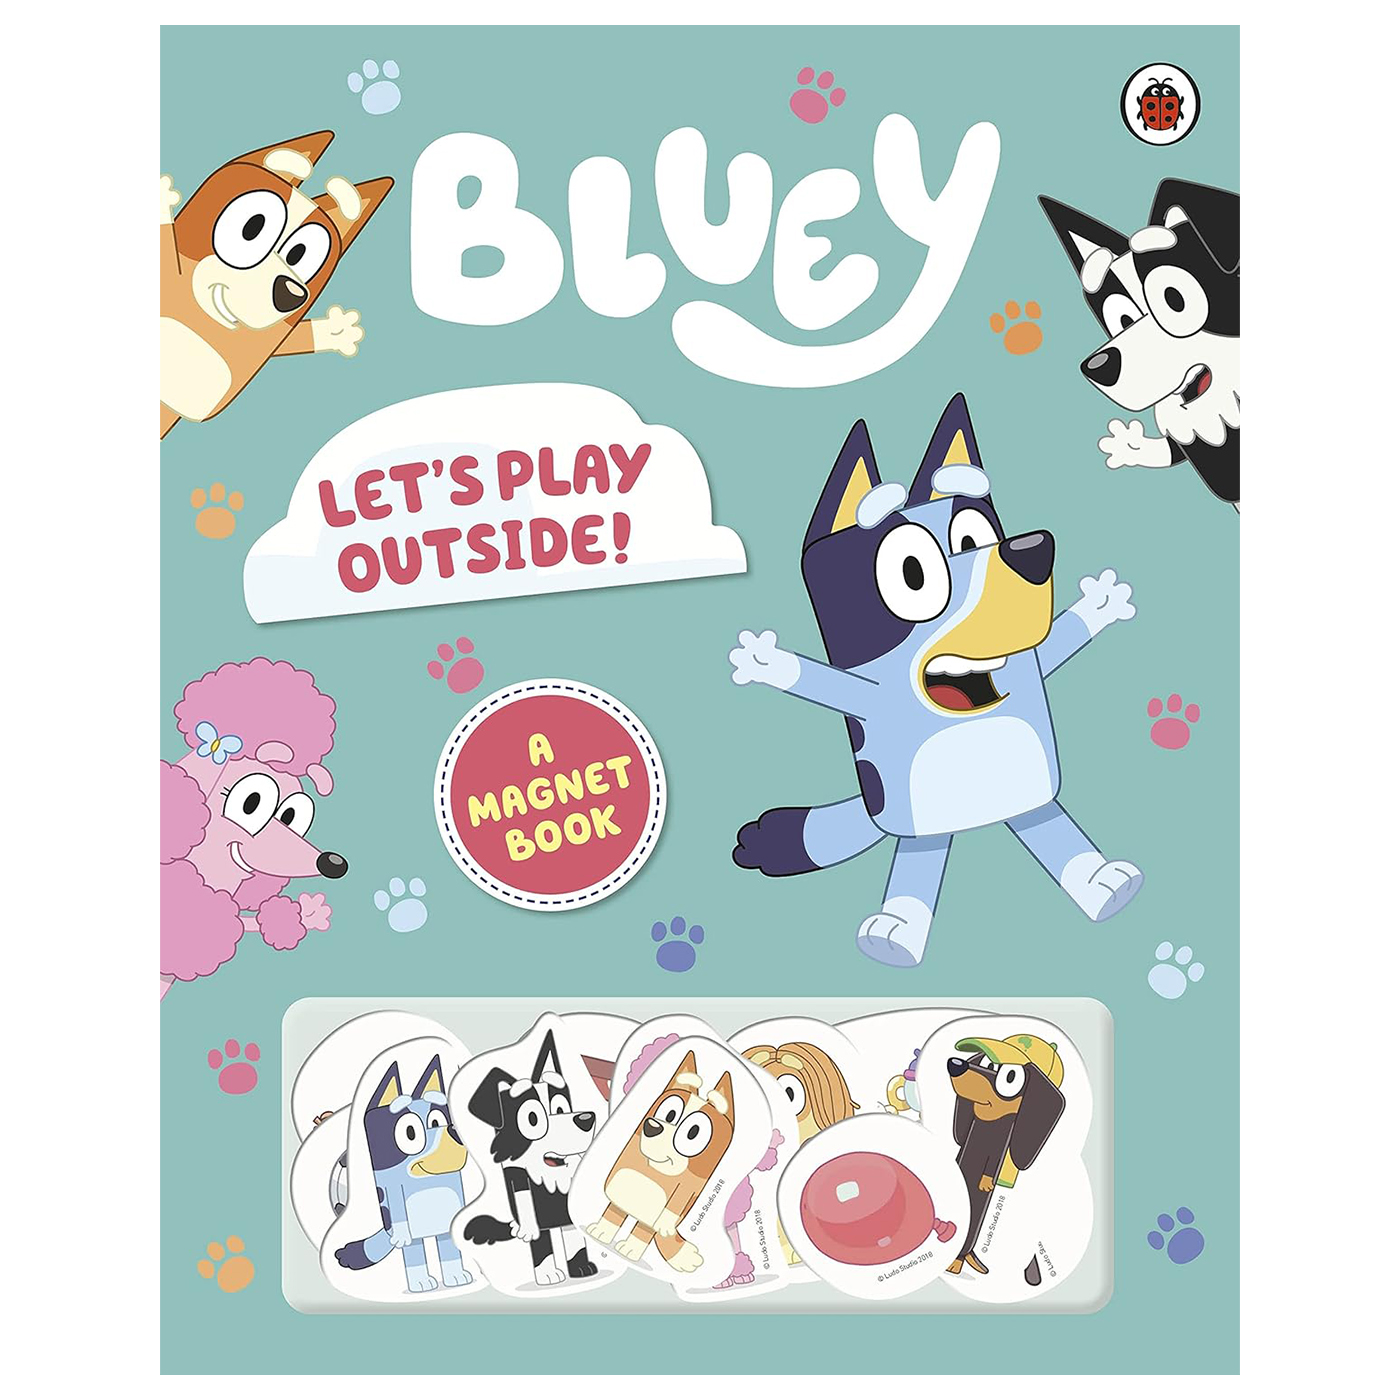 LADYBIRD Bluey Let's Play Outside Magnet book